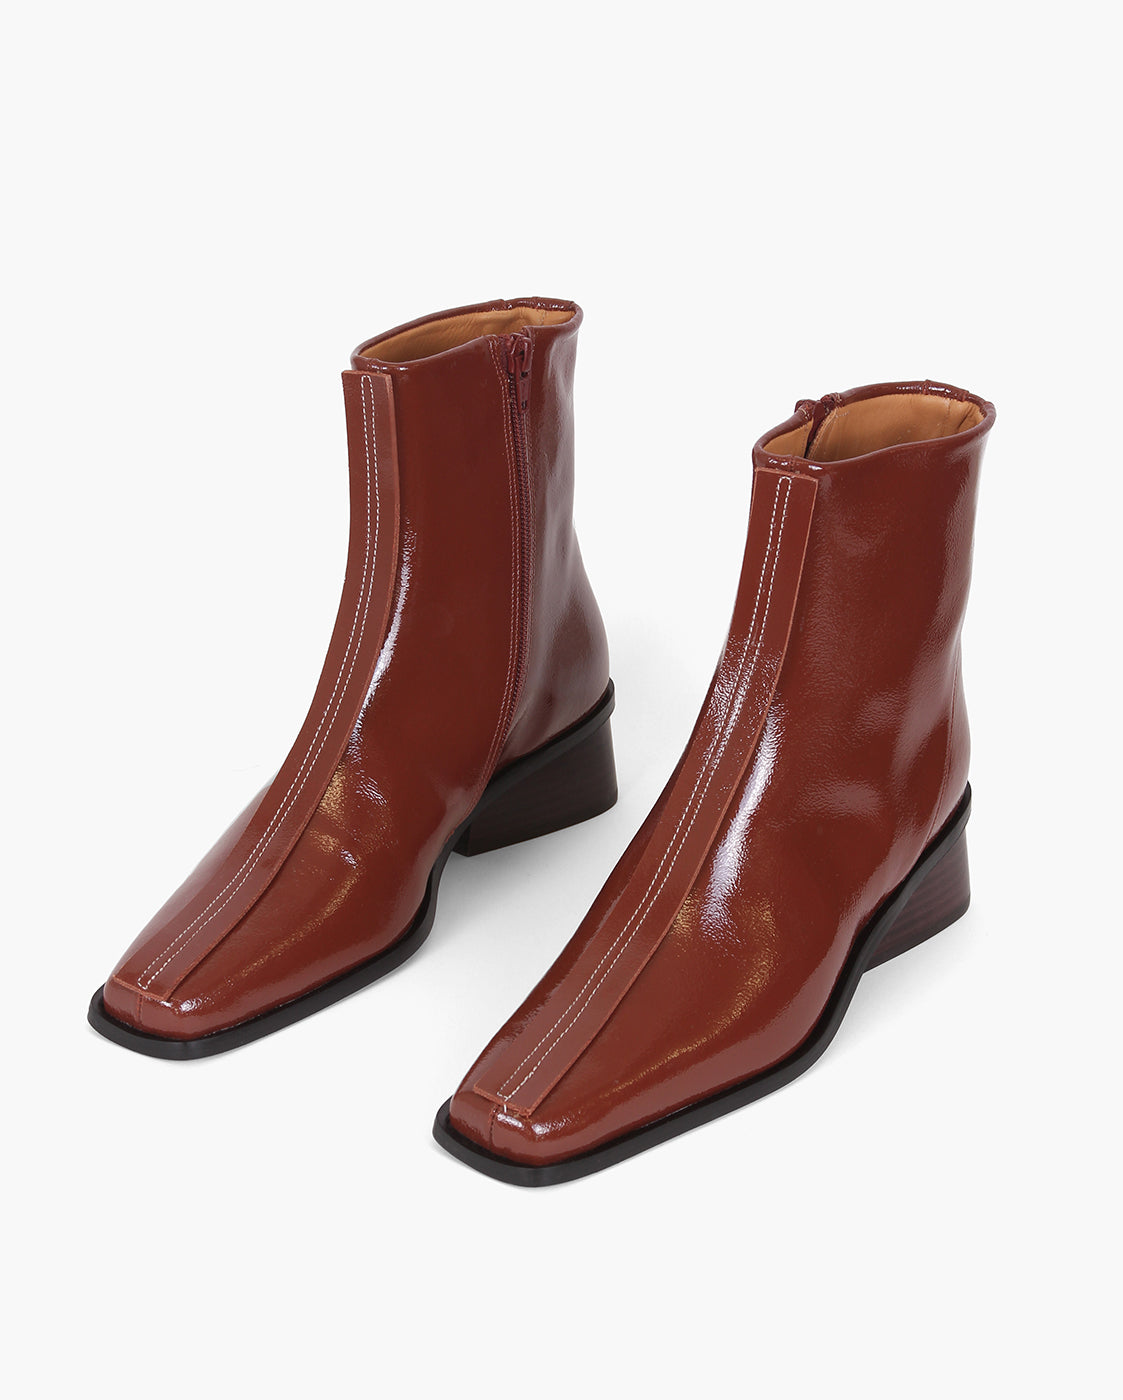 Miki Boot 35mm Patent Leather Pecan - Special Price